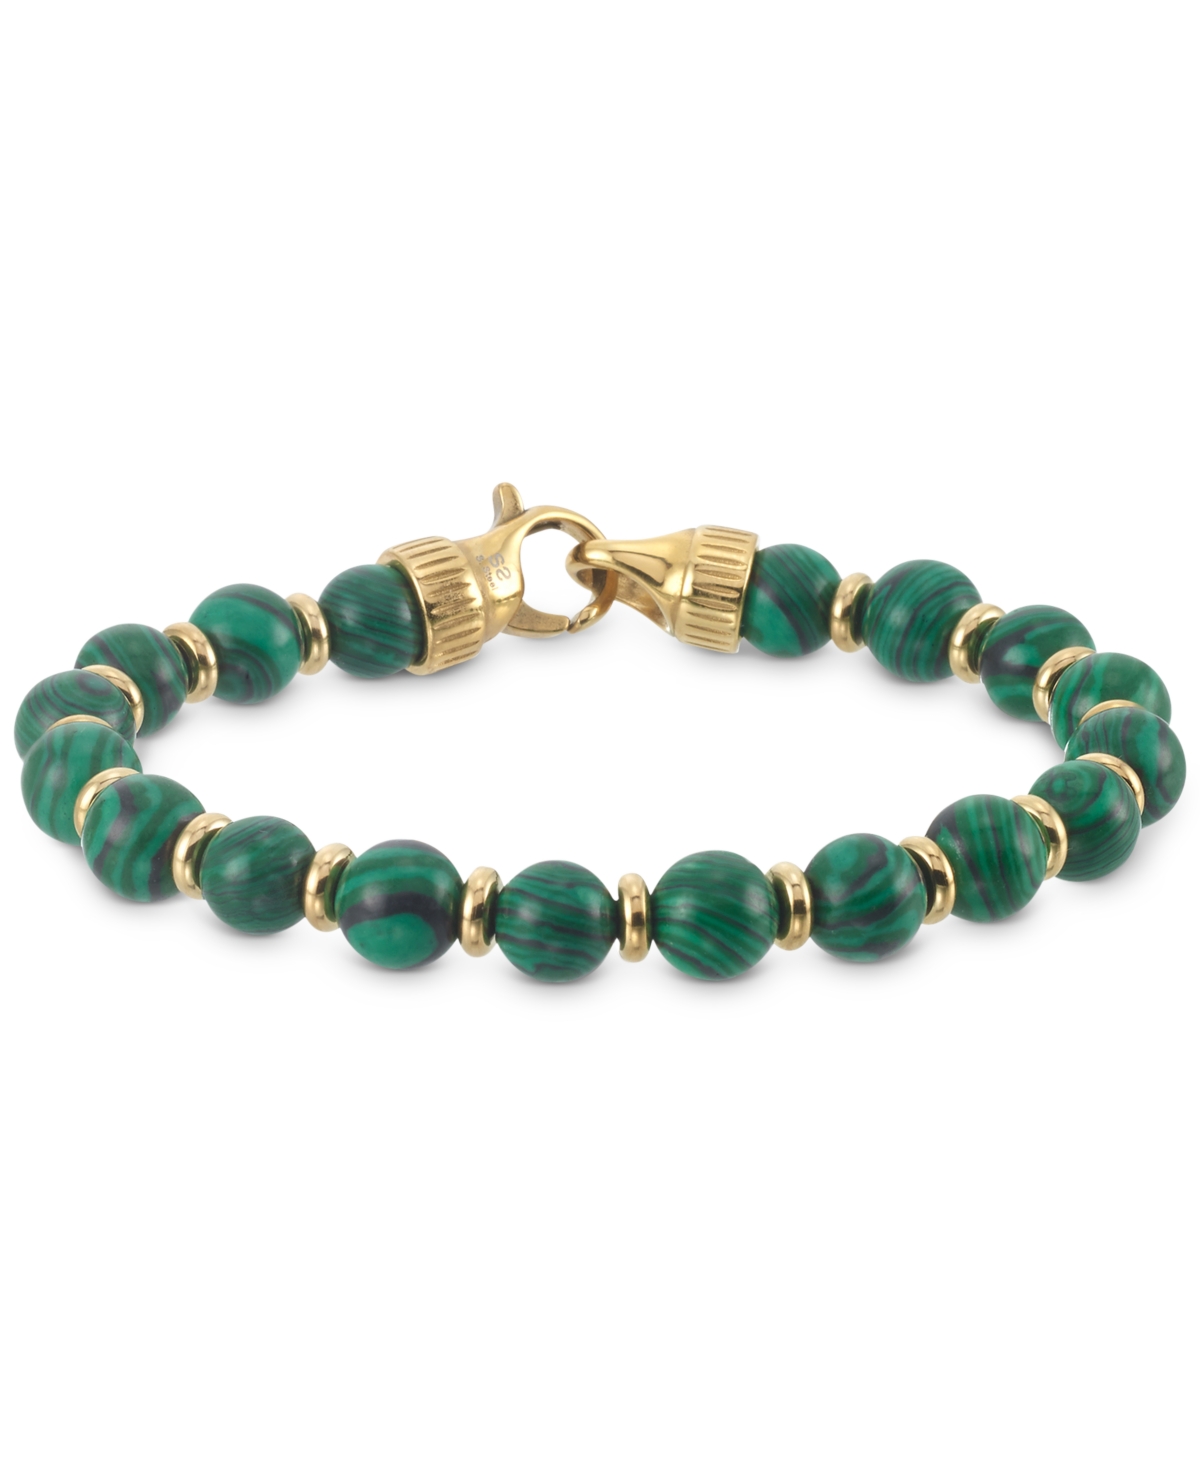 Legacy for Men by Simone I. Smith Malachite Bead Stretch Bracelet in Gold-Tone Ion-Plated Stainless Steel